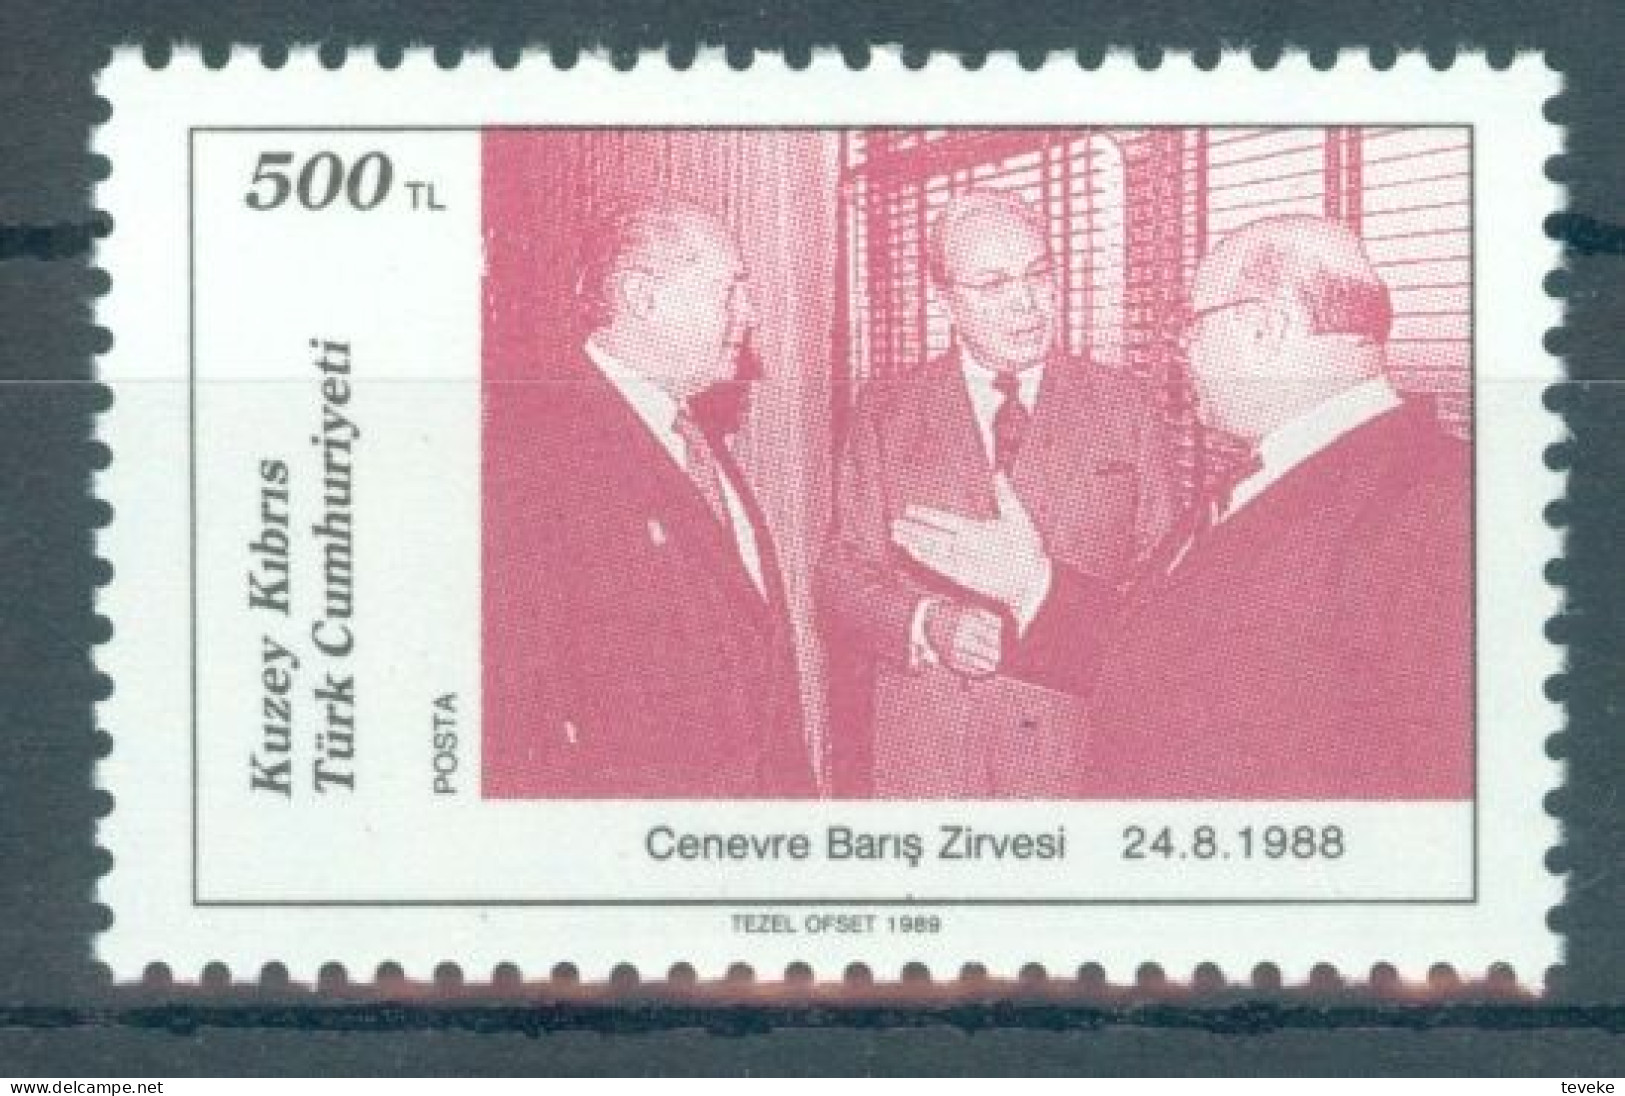 TURKISH CYPRUS 1989 - Michel Nr. 251 - MNH ** - Geneva Peace Conference For Cyprus - Ungebraucht